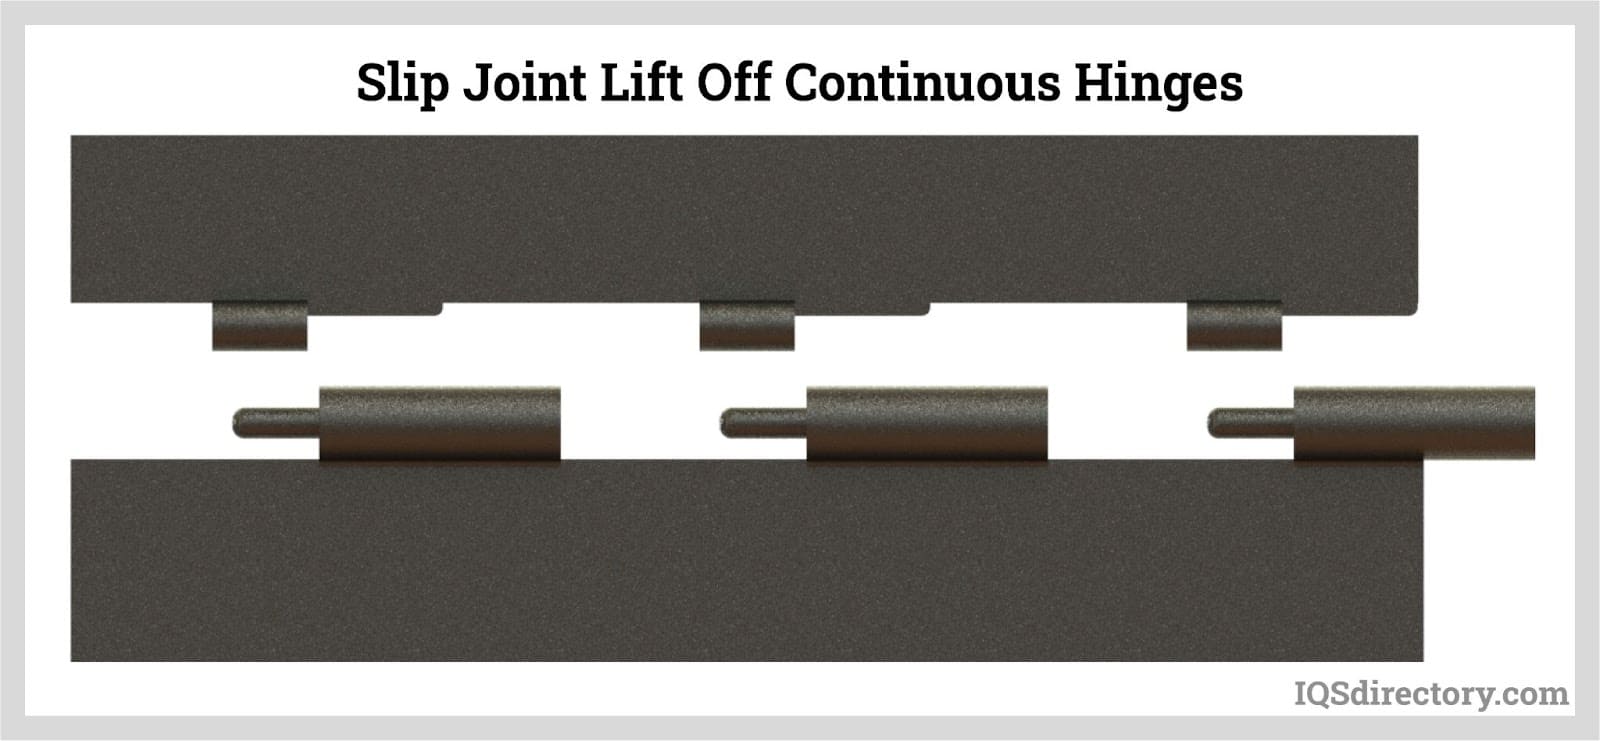 Slip Joint Lift Off Continuous Hinges